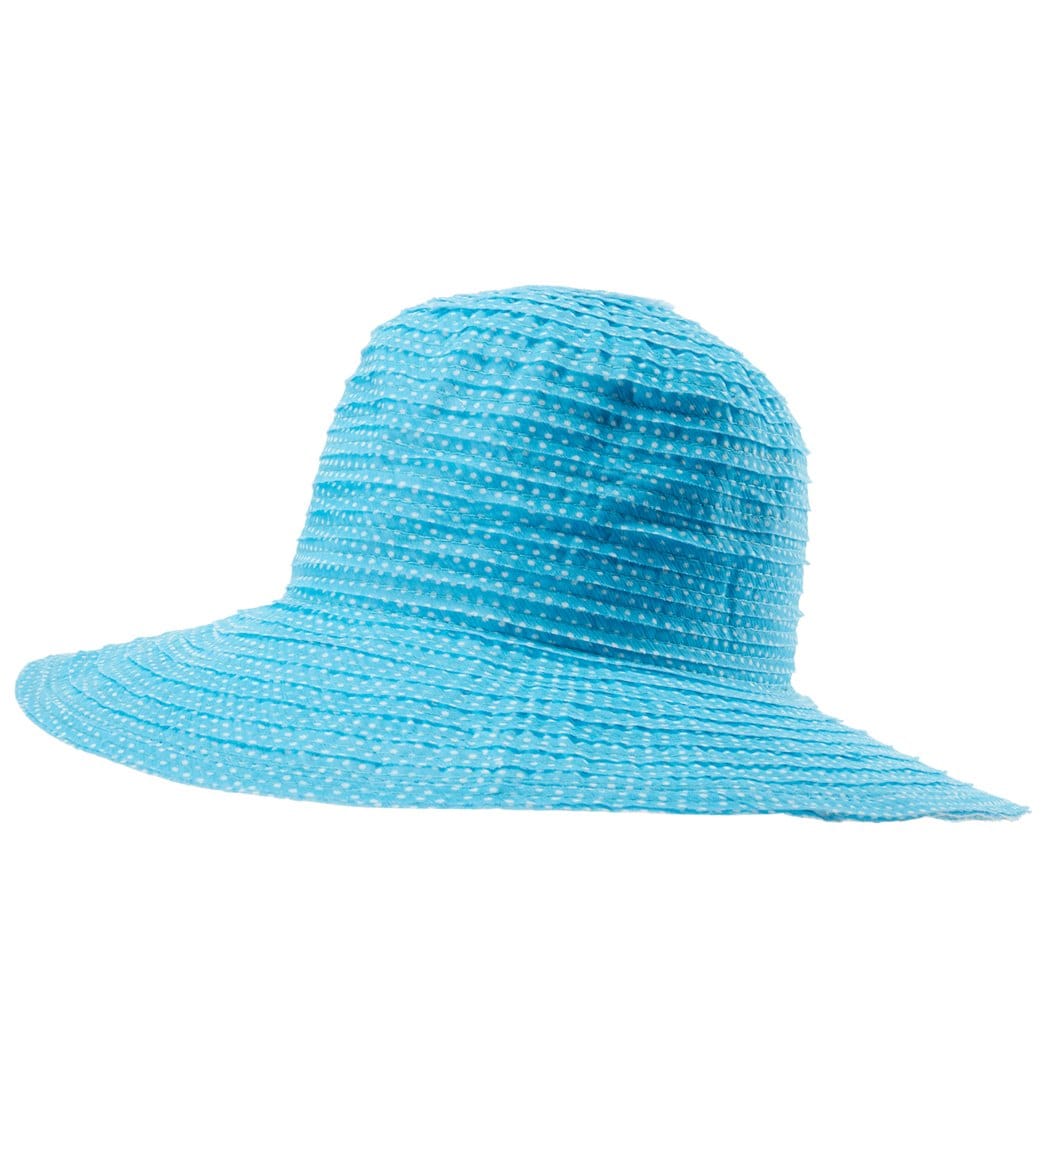 Wallaroo Girl's Petite Scrunchie Hat 5-12 Years - Turquoise/White Polyester - Swimoutlet.com